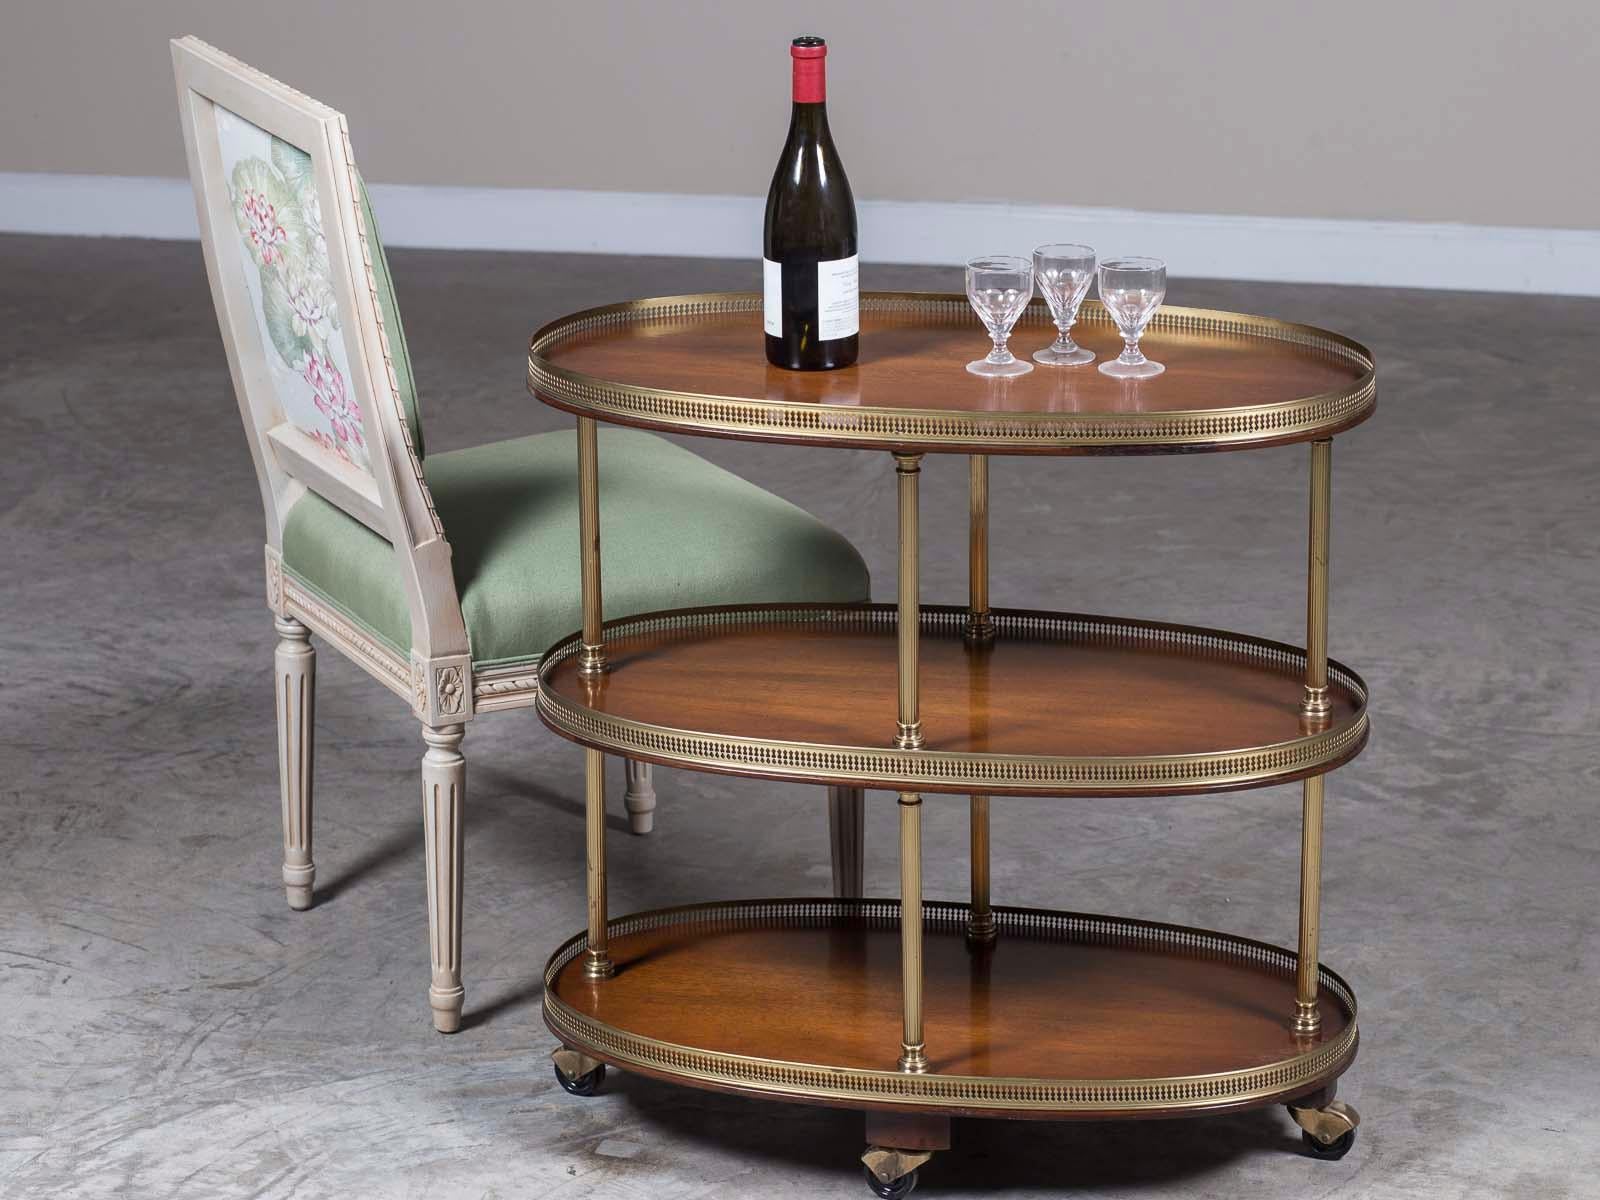 A vintage French oval mahogany and brass three tier rolling cart circa 1970 with a gallery rail on all three levels. This attractive and simple bar cart is set on four casters as it was designed to be moved about an interior as needed. Please use